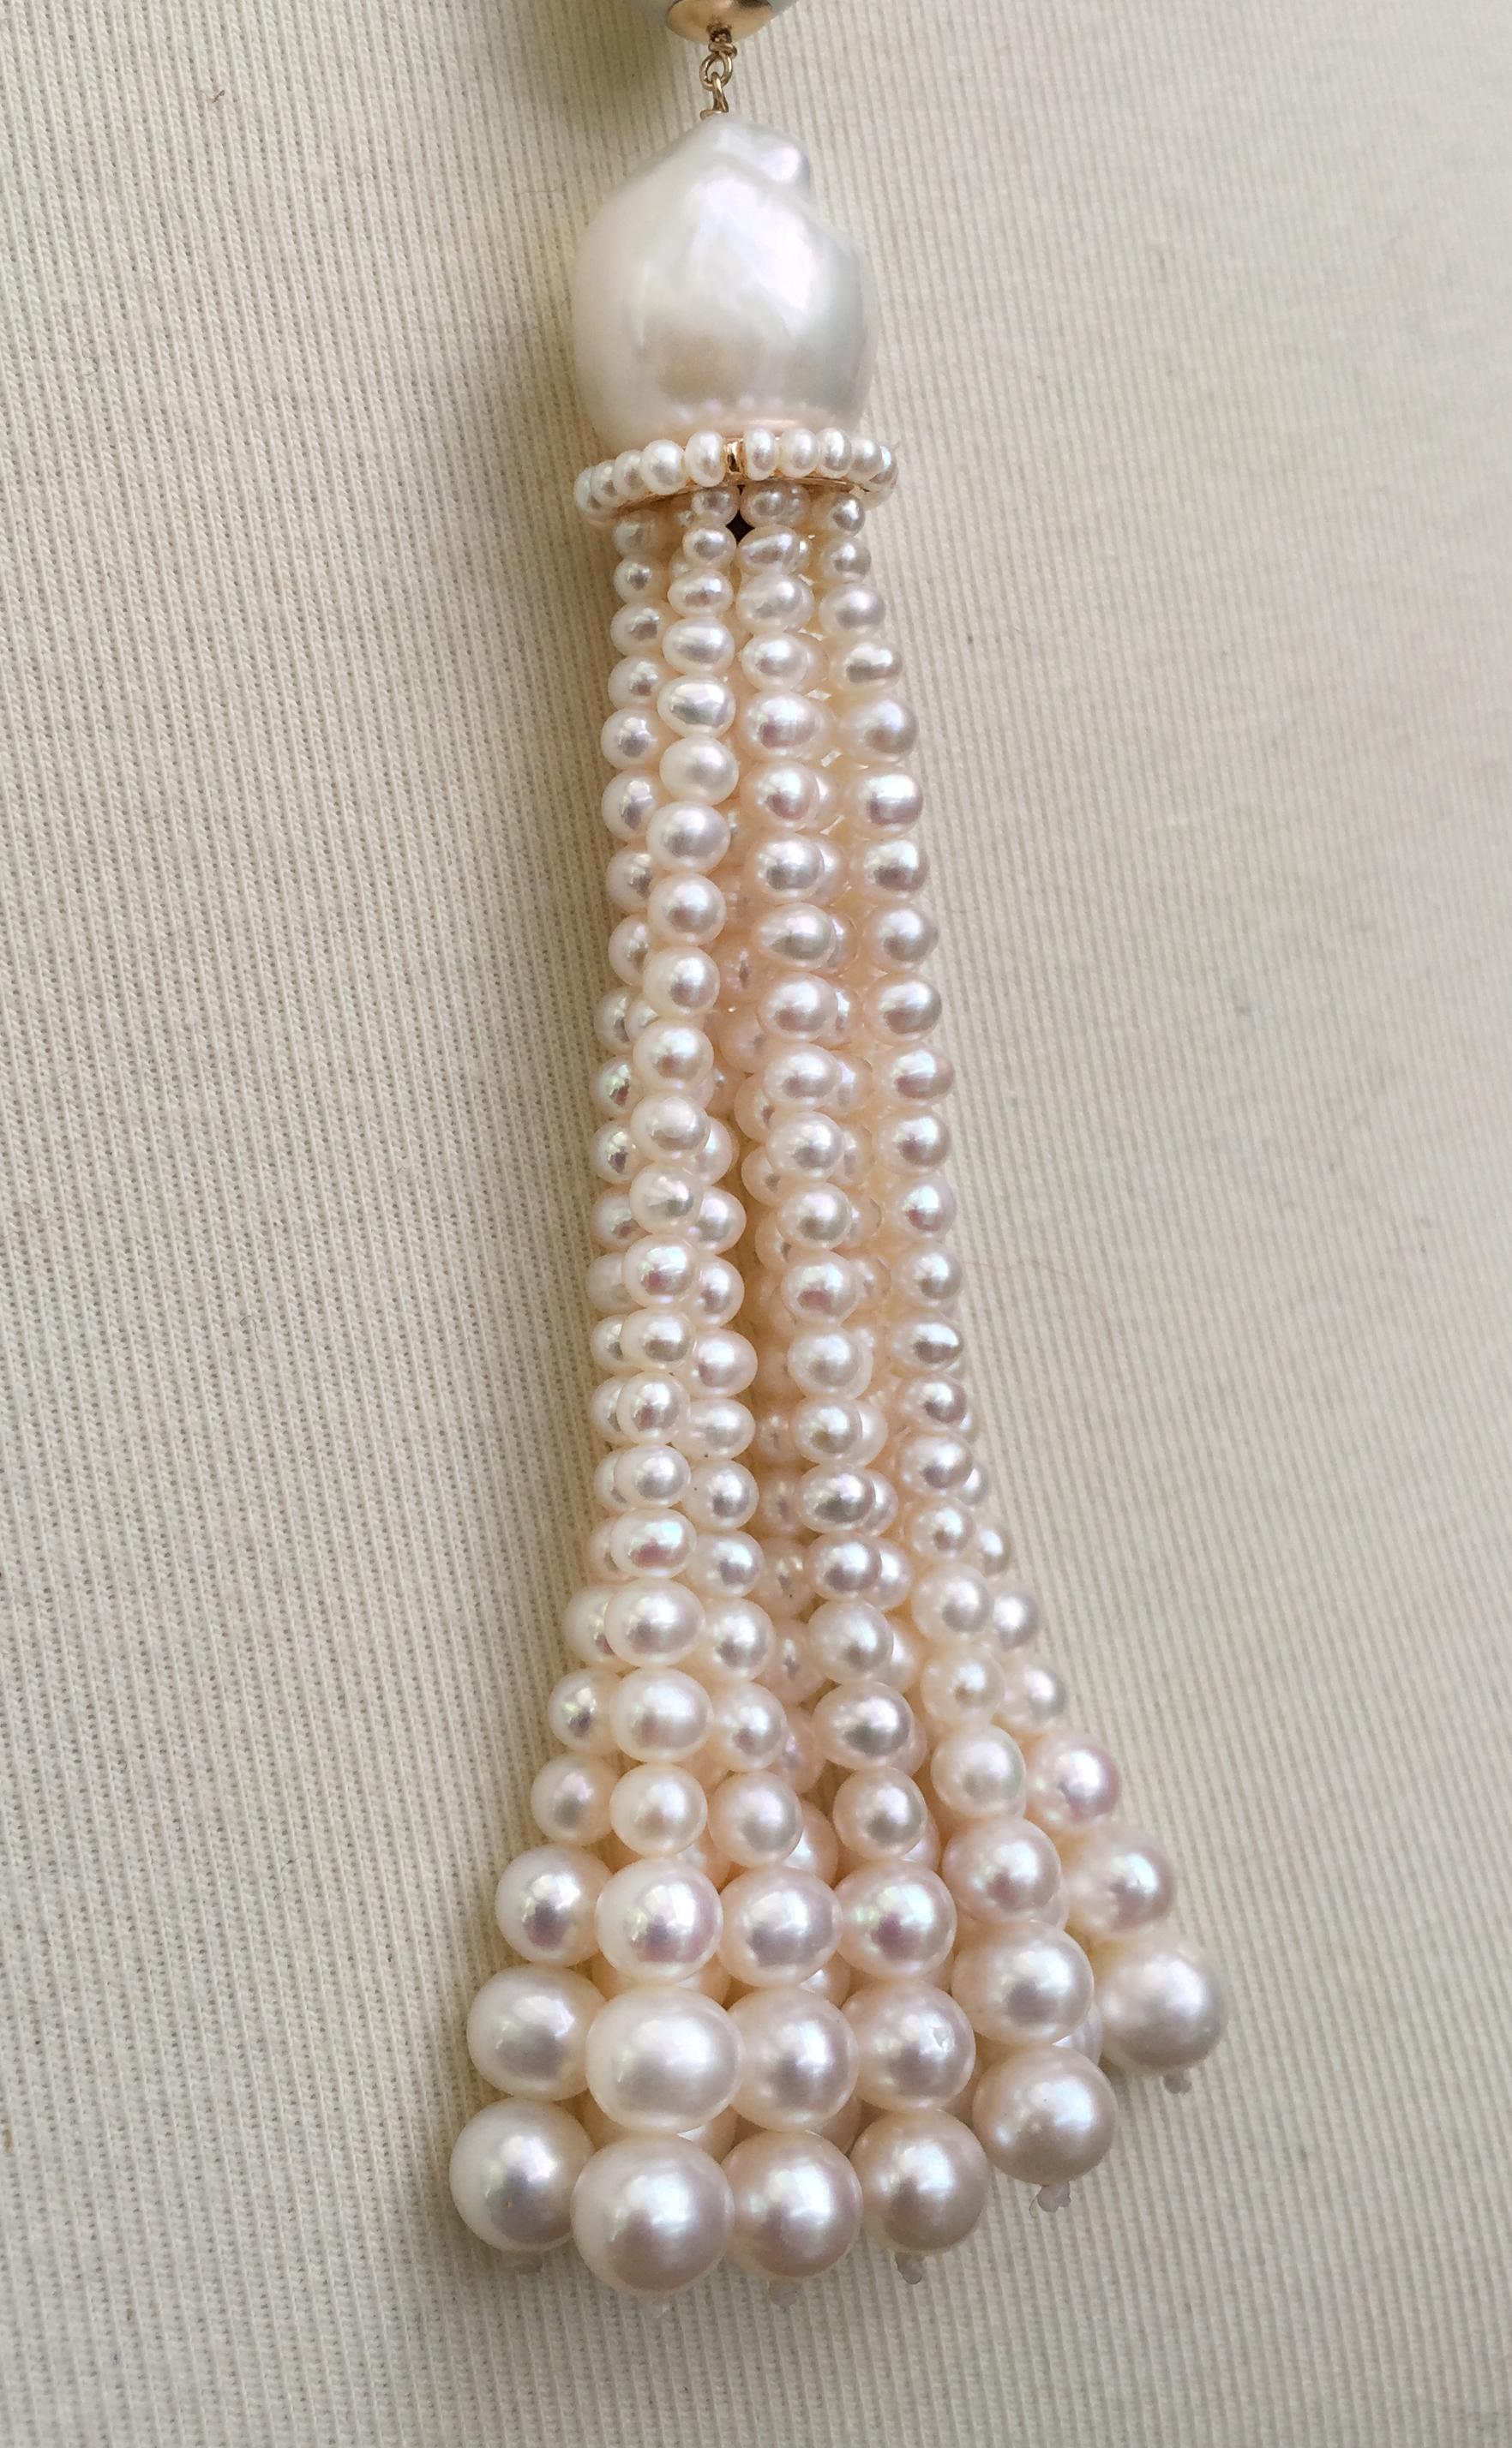 Women's White Pearl Sautoir Necklace and Graduated Tassel with 14 Karat Gold Clasp